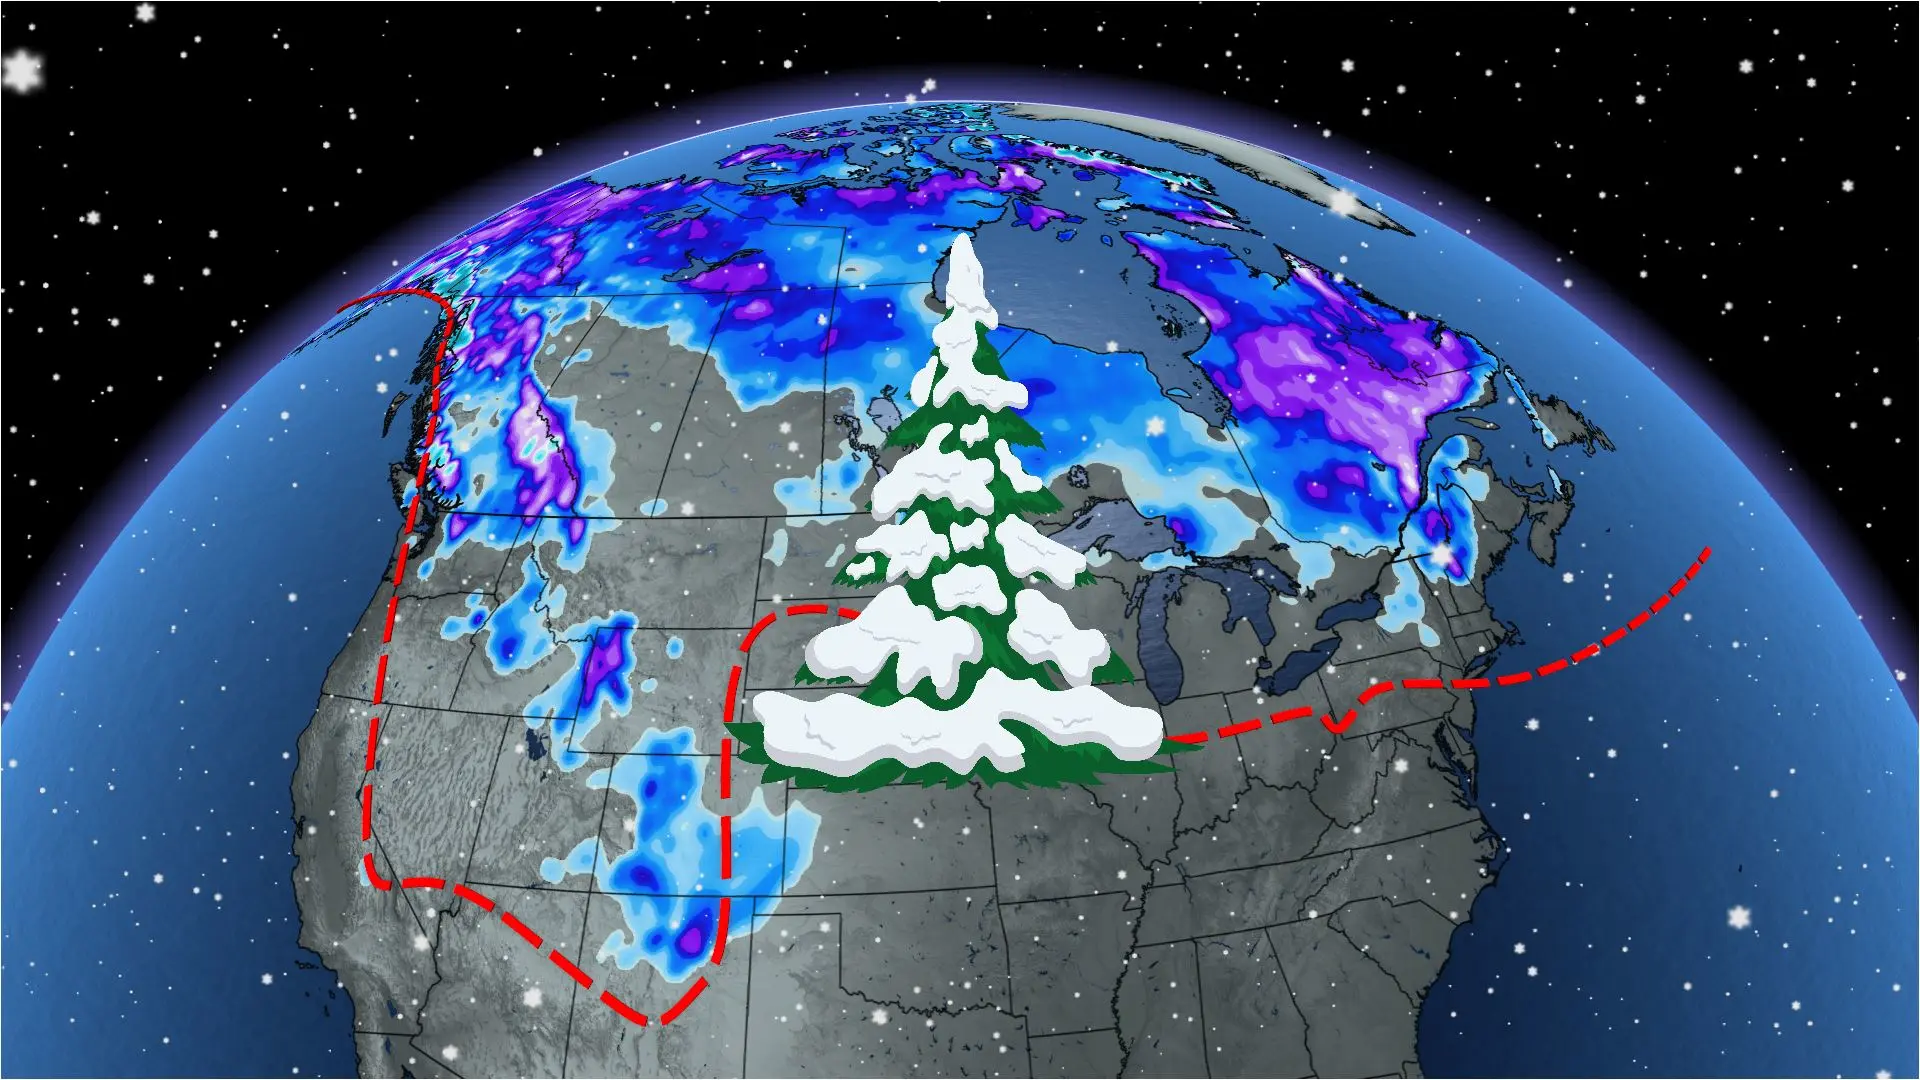 White Christmas? Why El Niño could wreck plans for snow